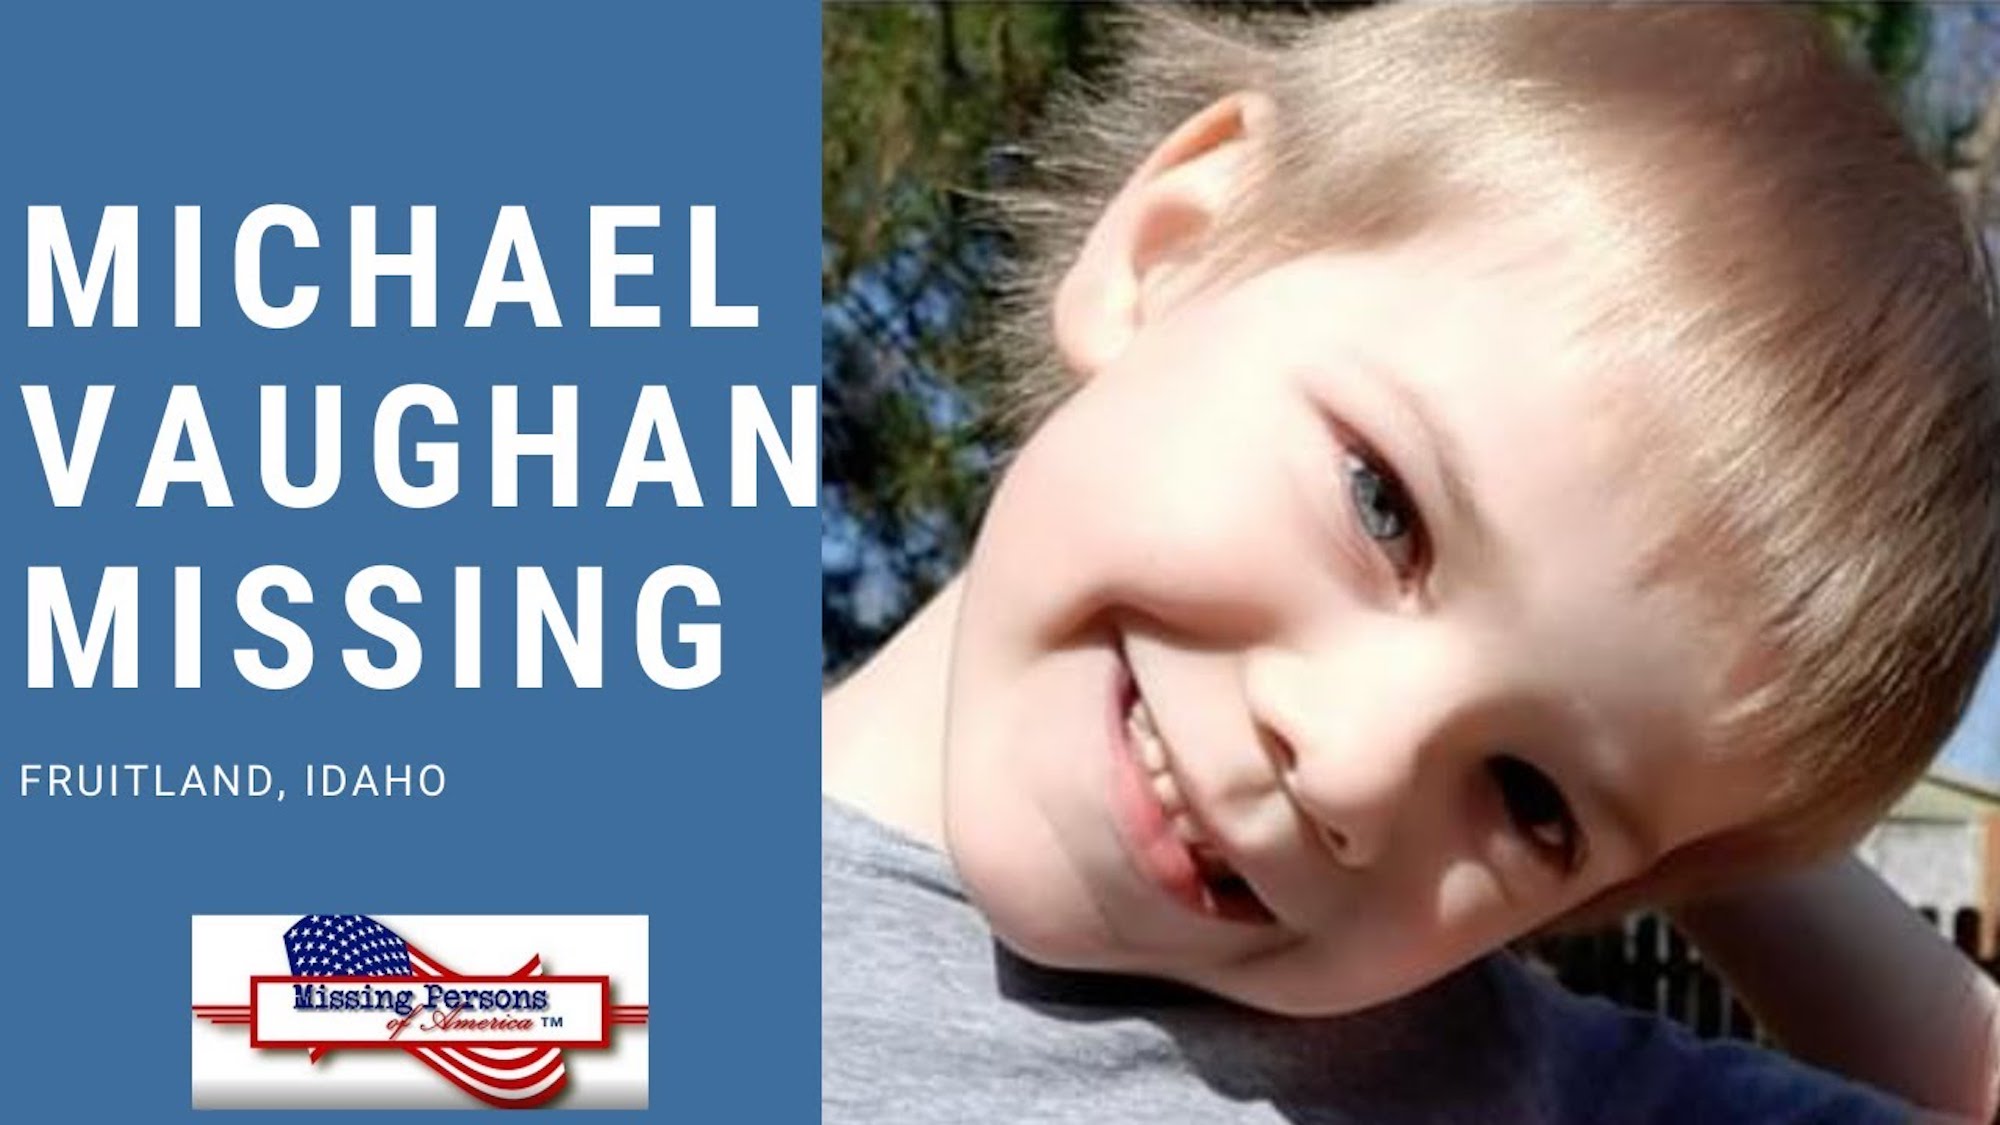 Who is Michael Vaughan? Learn all about the missing child in Idaho